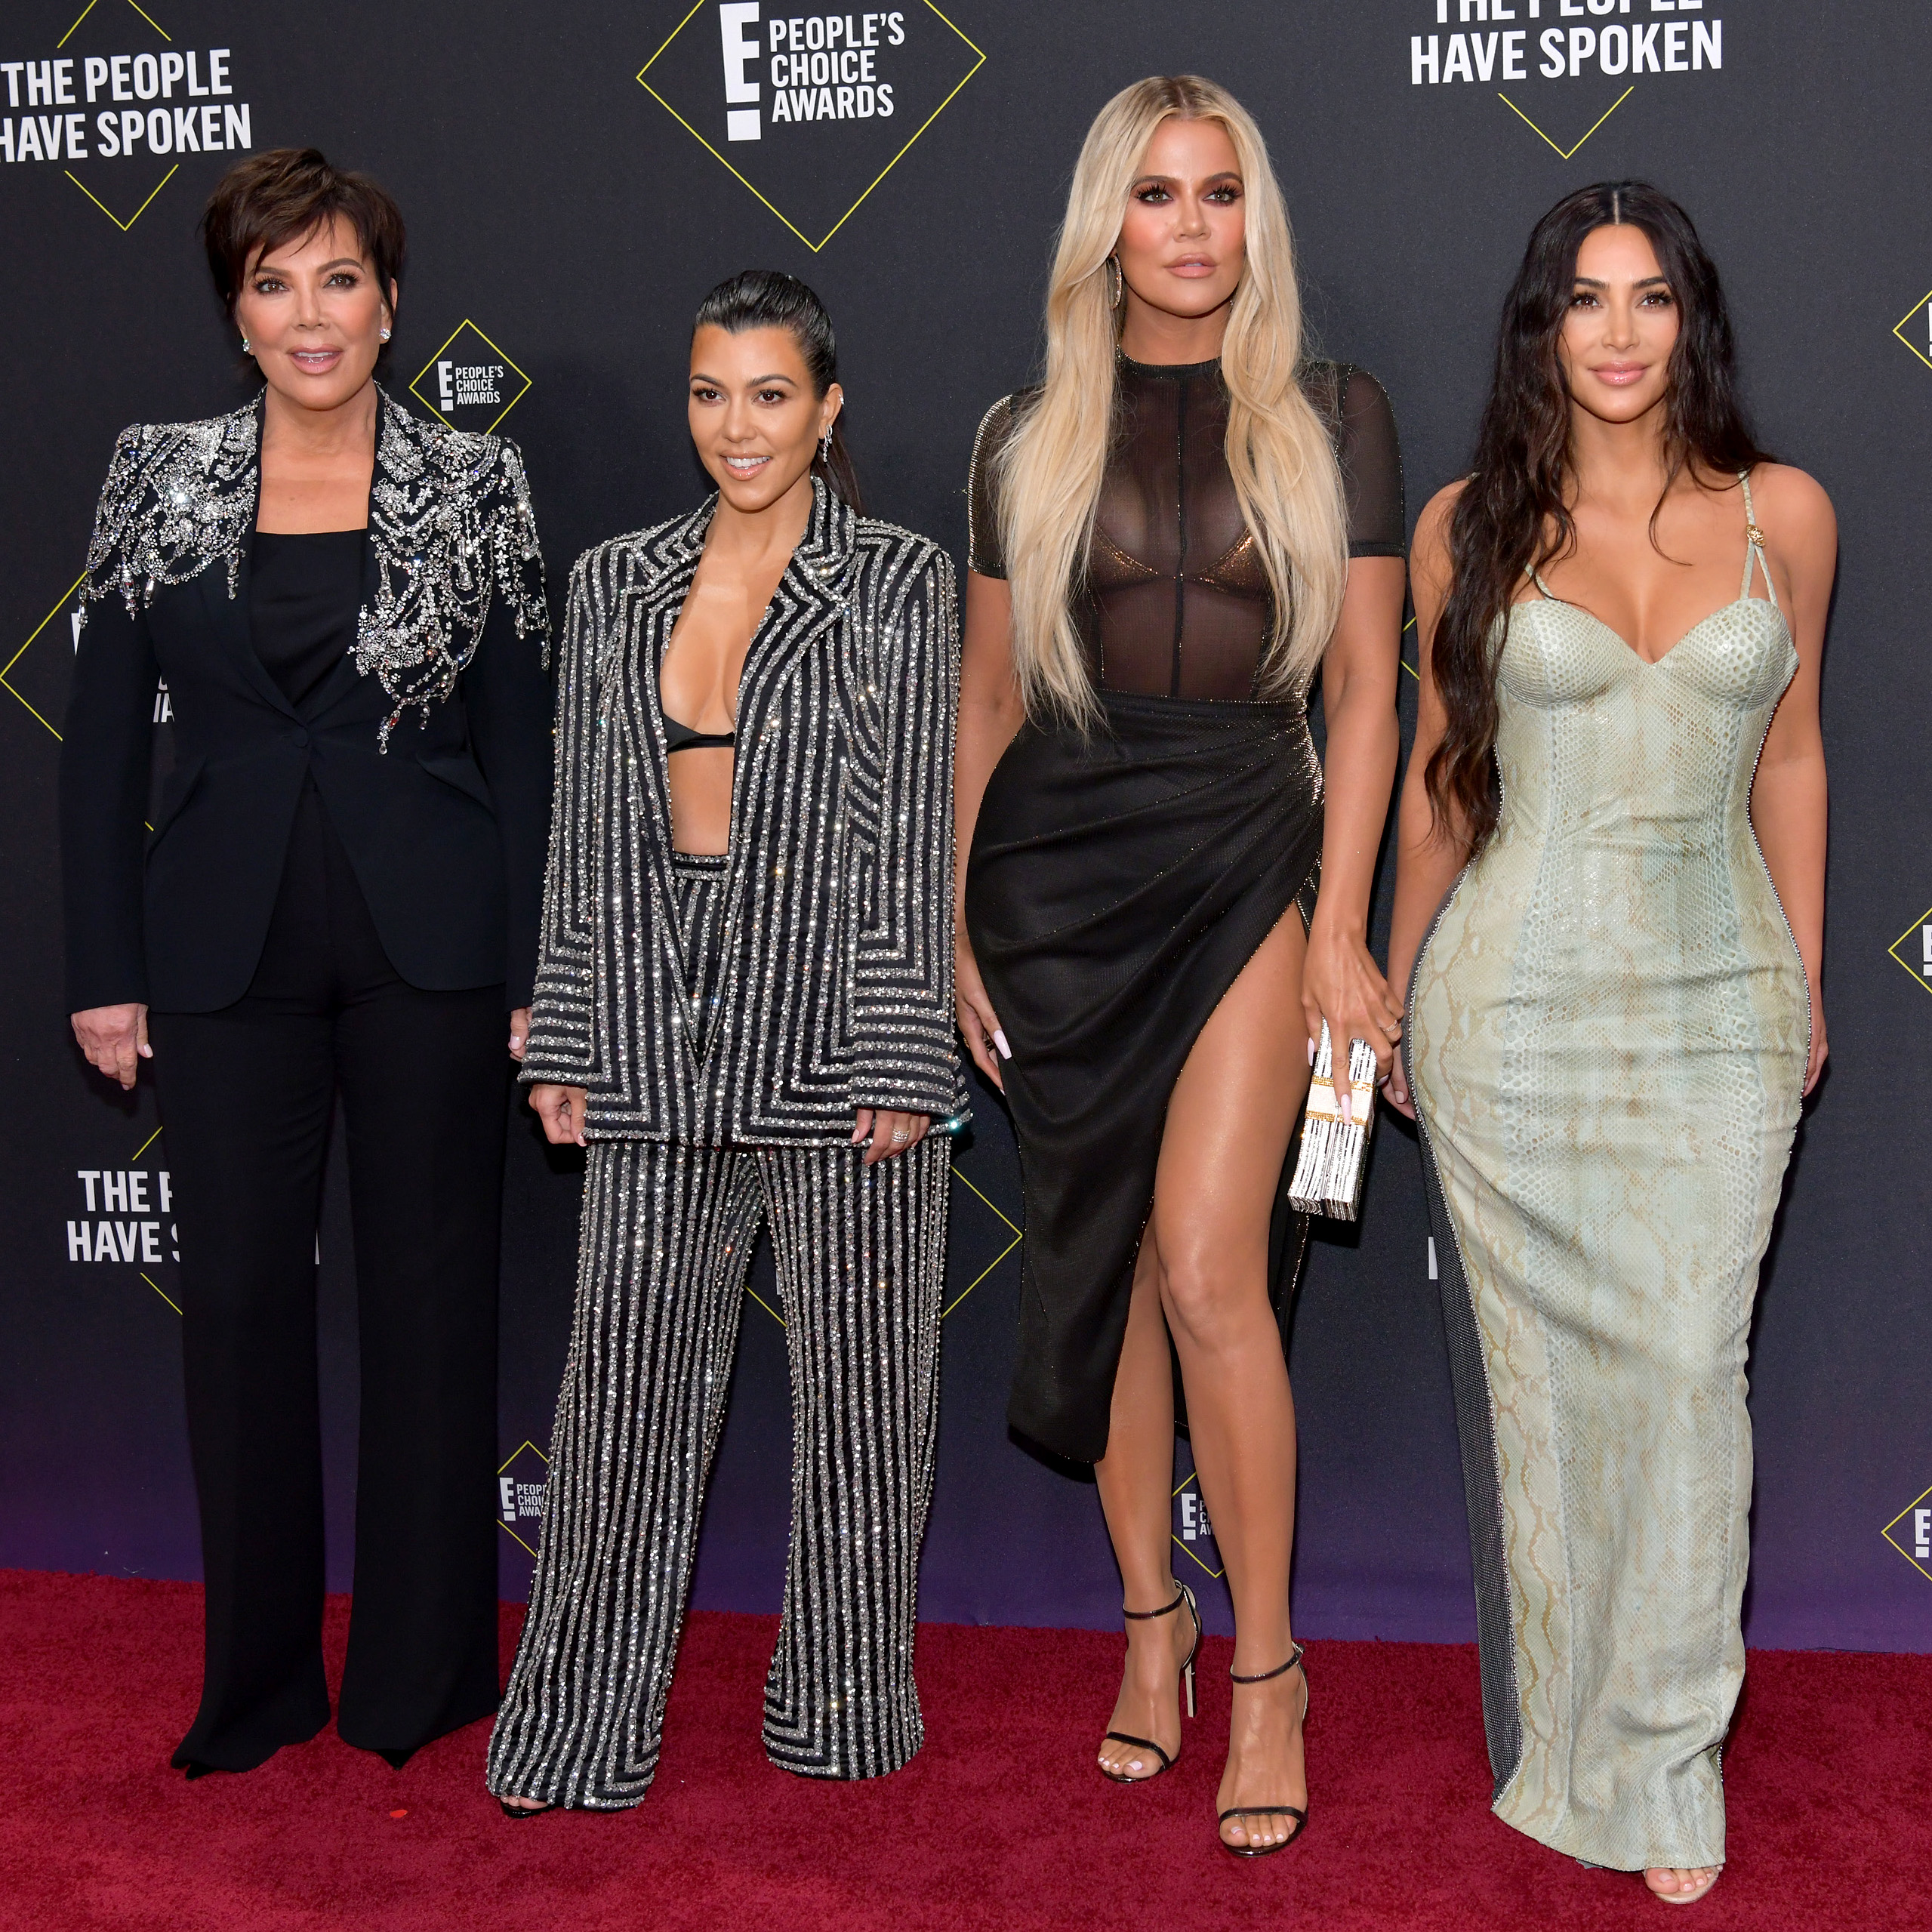 Kris Jenner posing with her daughters Kourtney, Khloé, and Kim at the 2019 E! People's Choice Awards